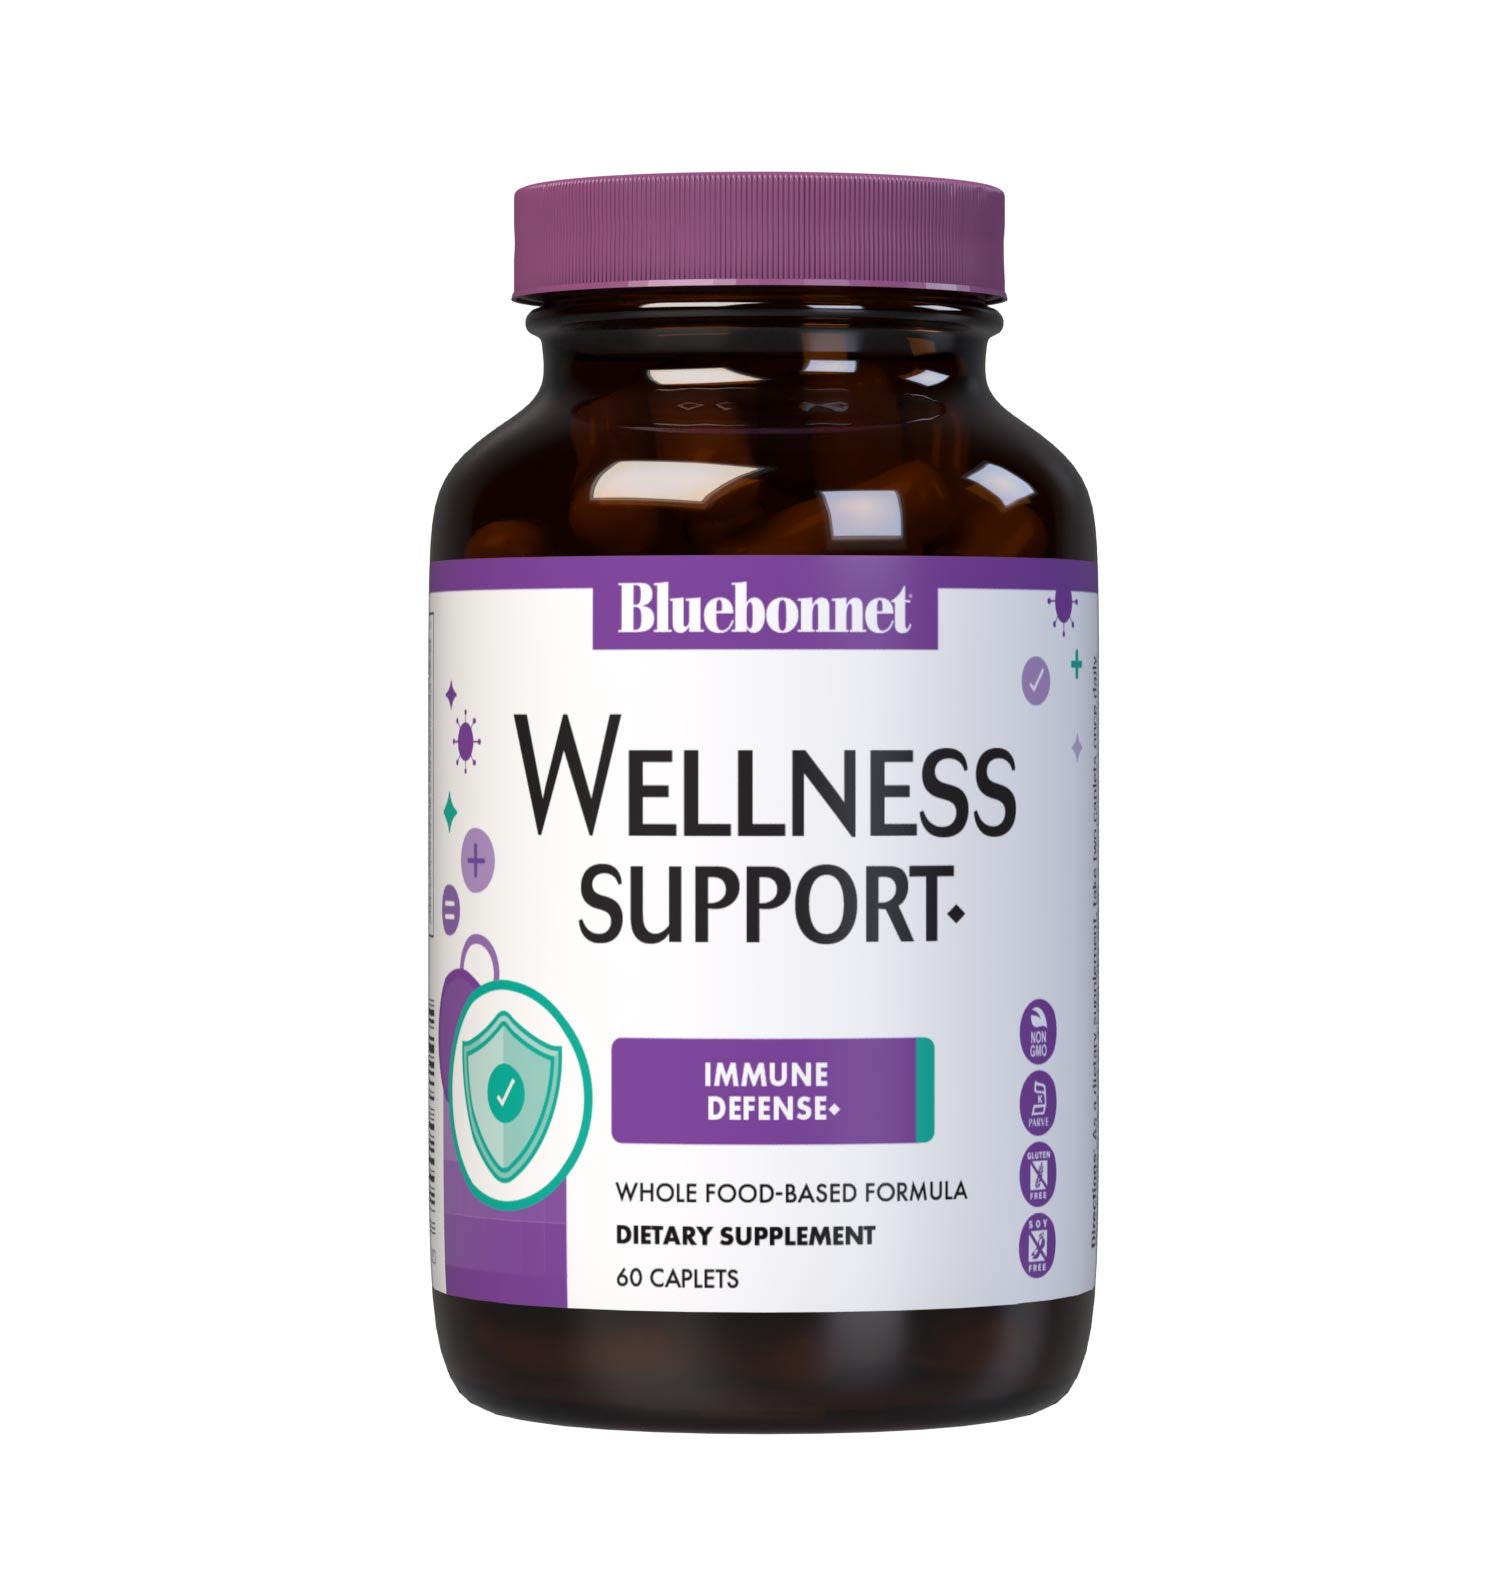 Bluebonnet’s Targeted Choice Wellness Support 30 Caplets are formulated with a complementary combination of non-GMO nutrients and sustainably sourced herbal extracts, such as vitamins A, C & D3, NAC, quercetin, zinc, andrographis, astragalus, elderberry, odor-less garlic, olive leaf, stinging nettle and turmeric.  #size_60 count